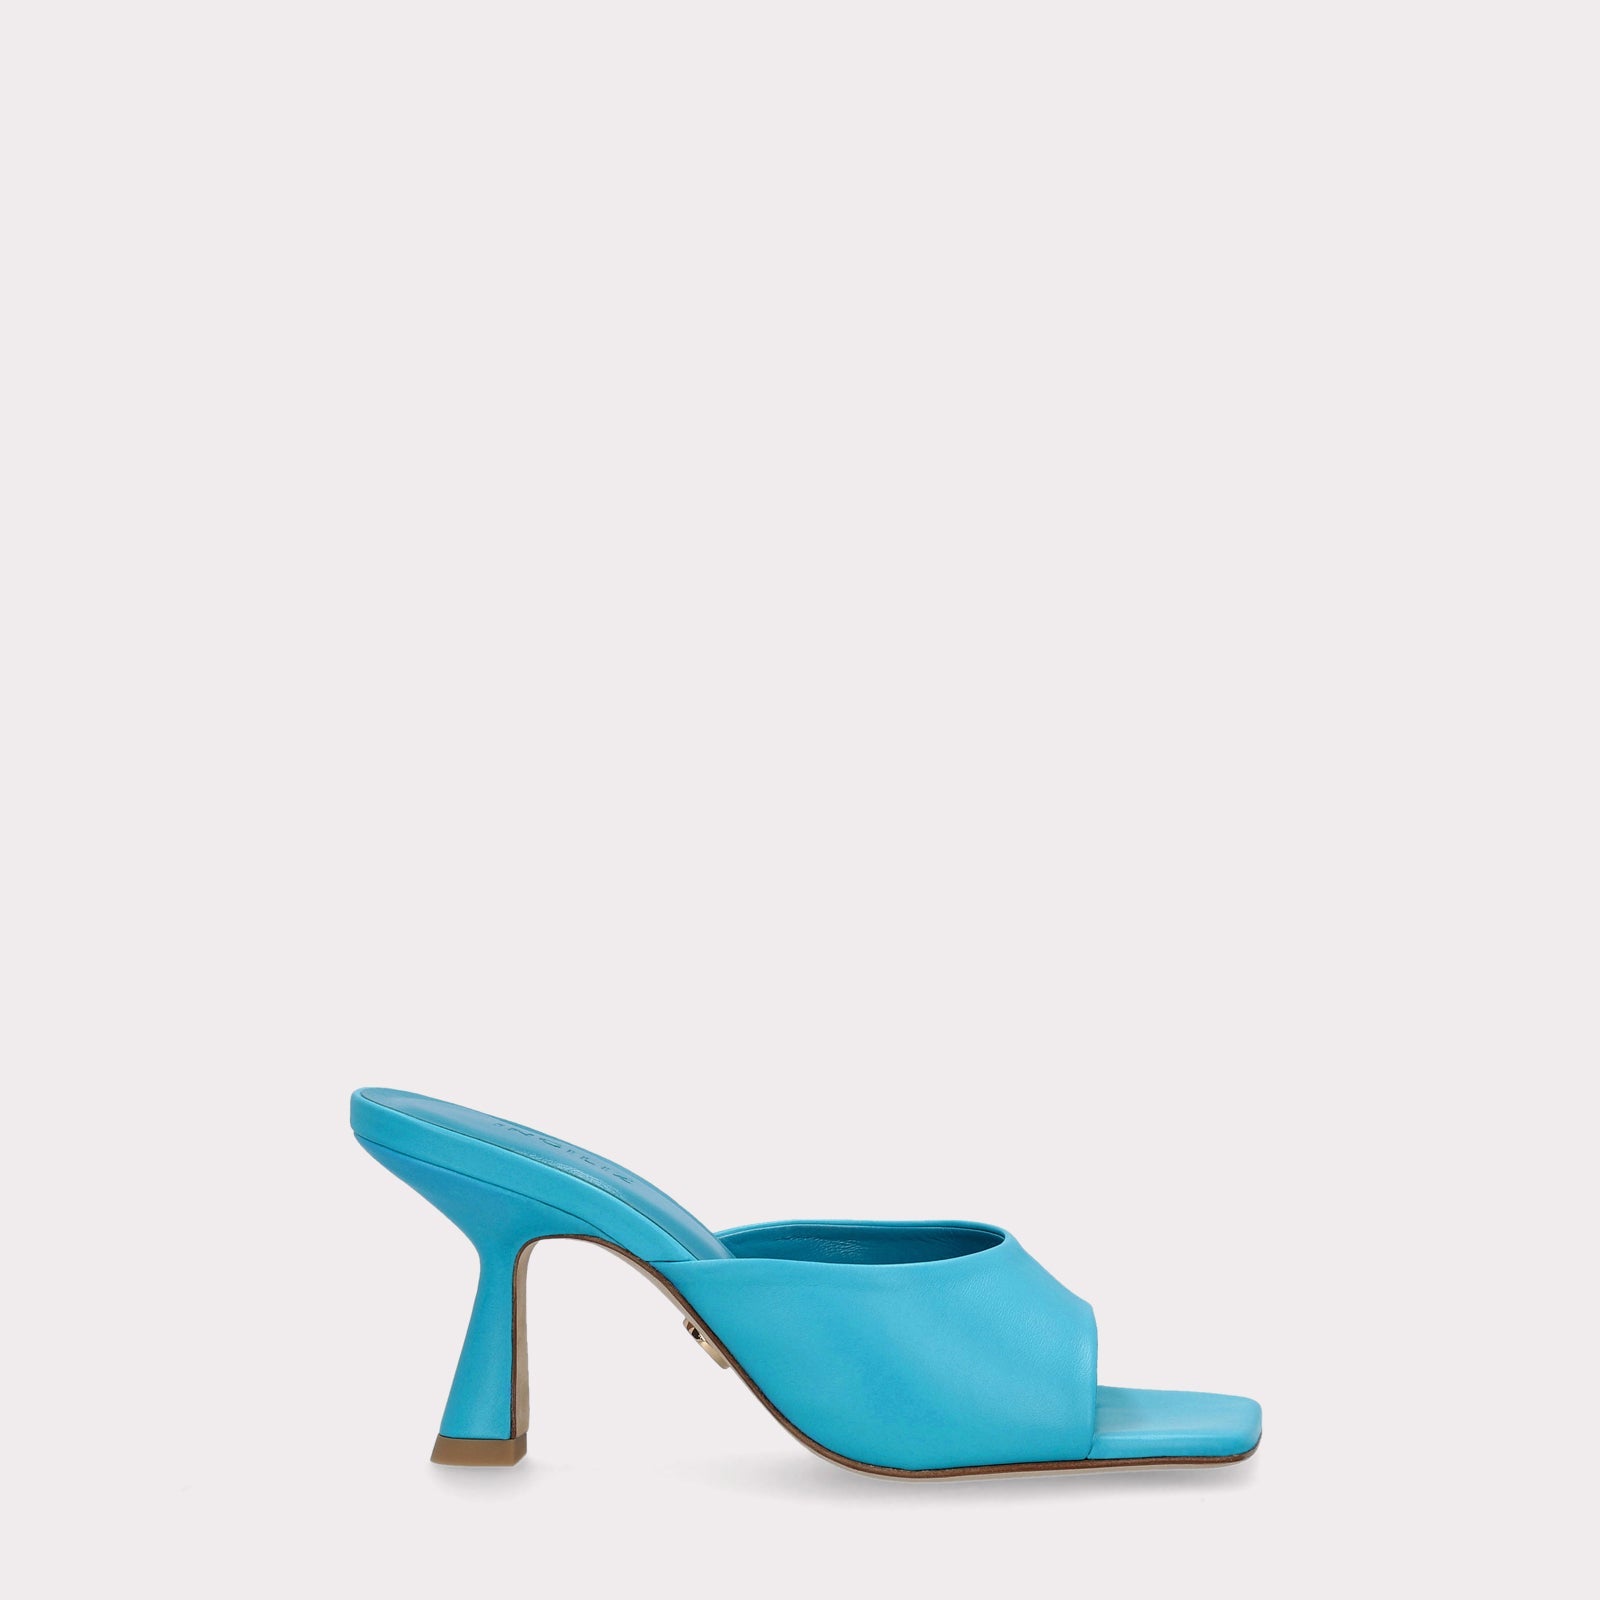 LEATHER MULES RENY BLUE